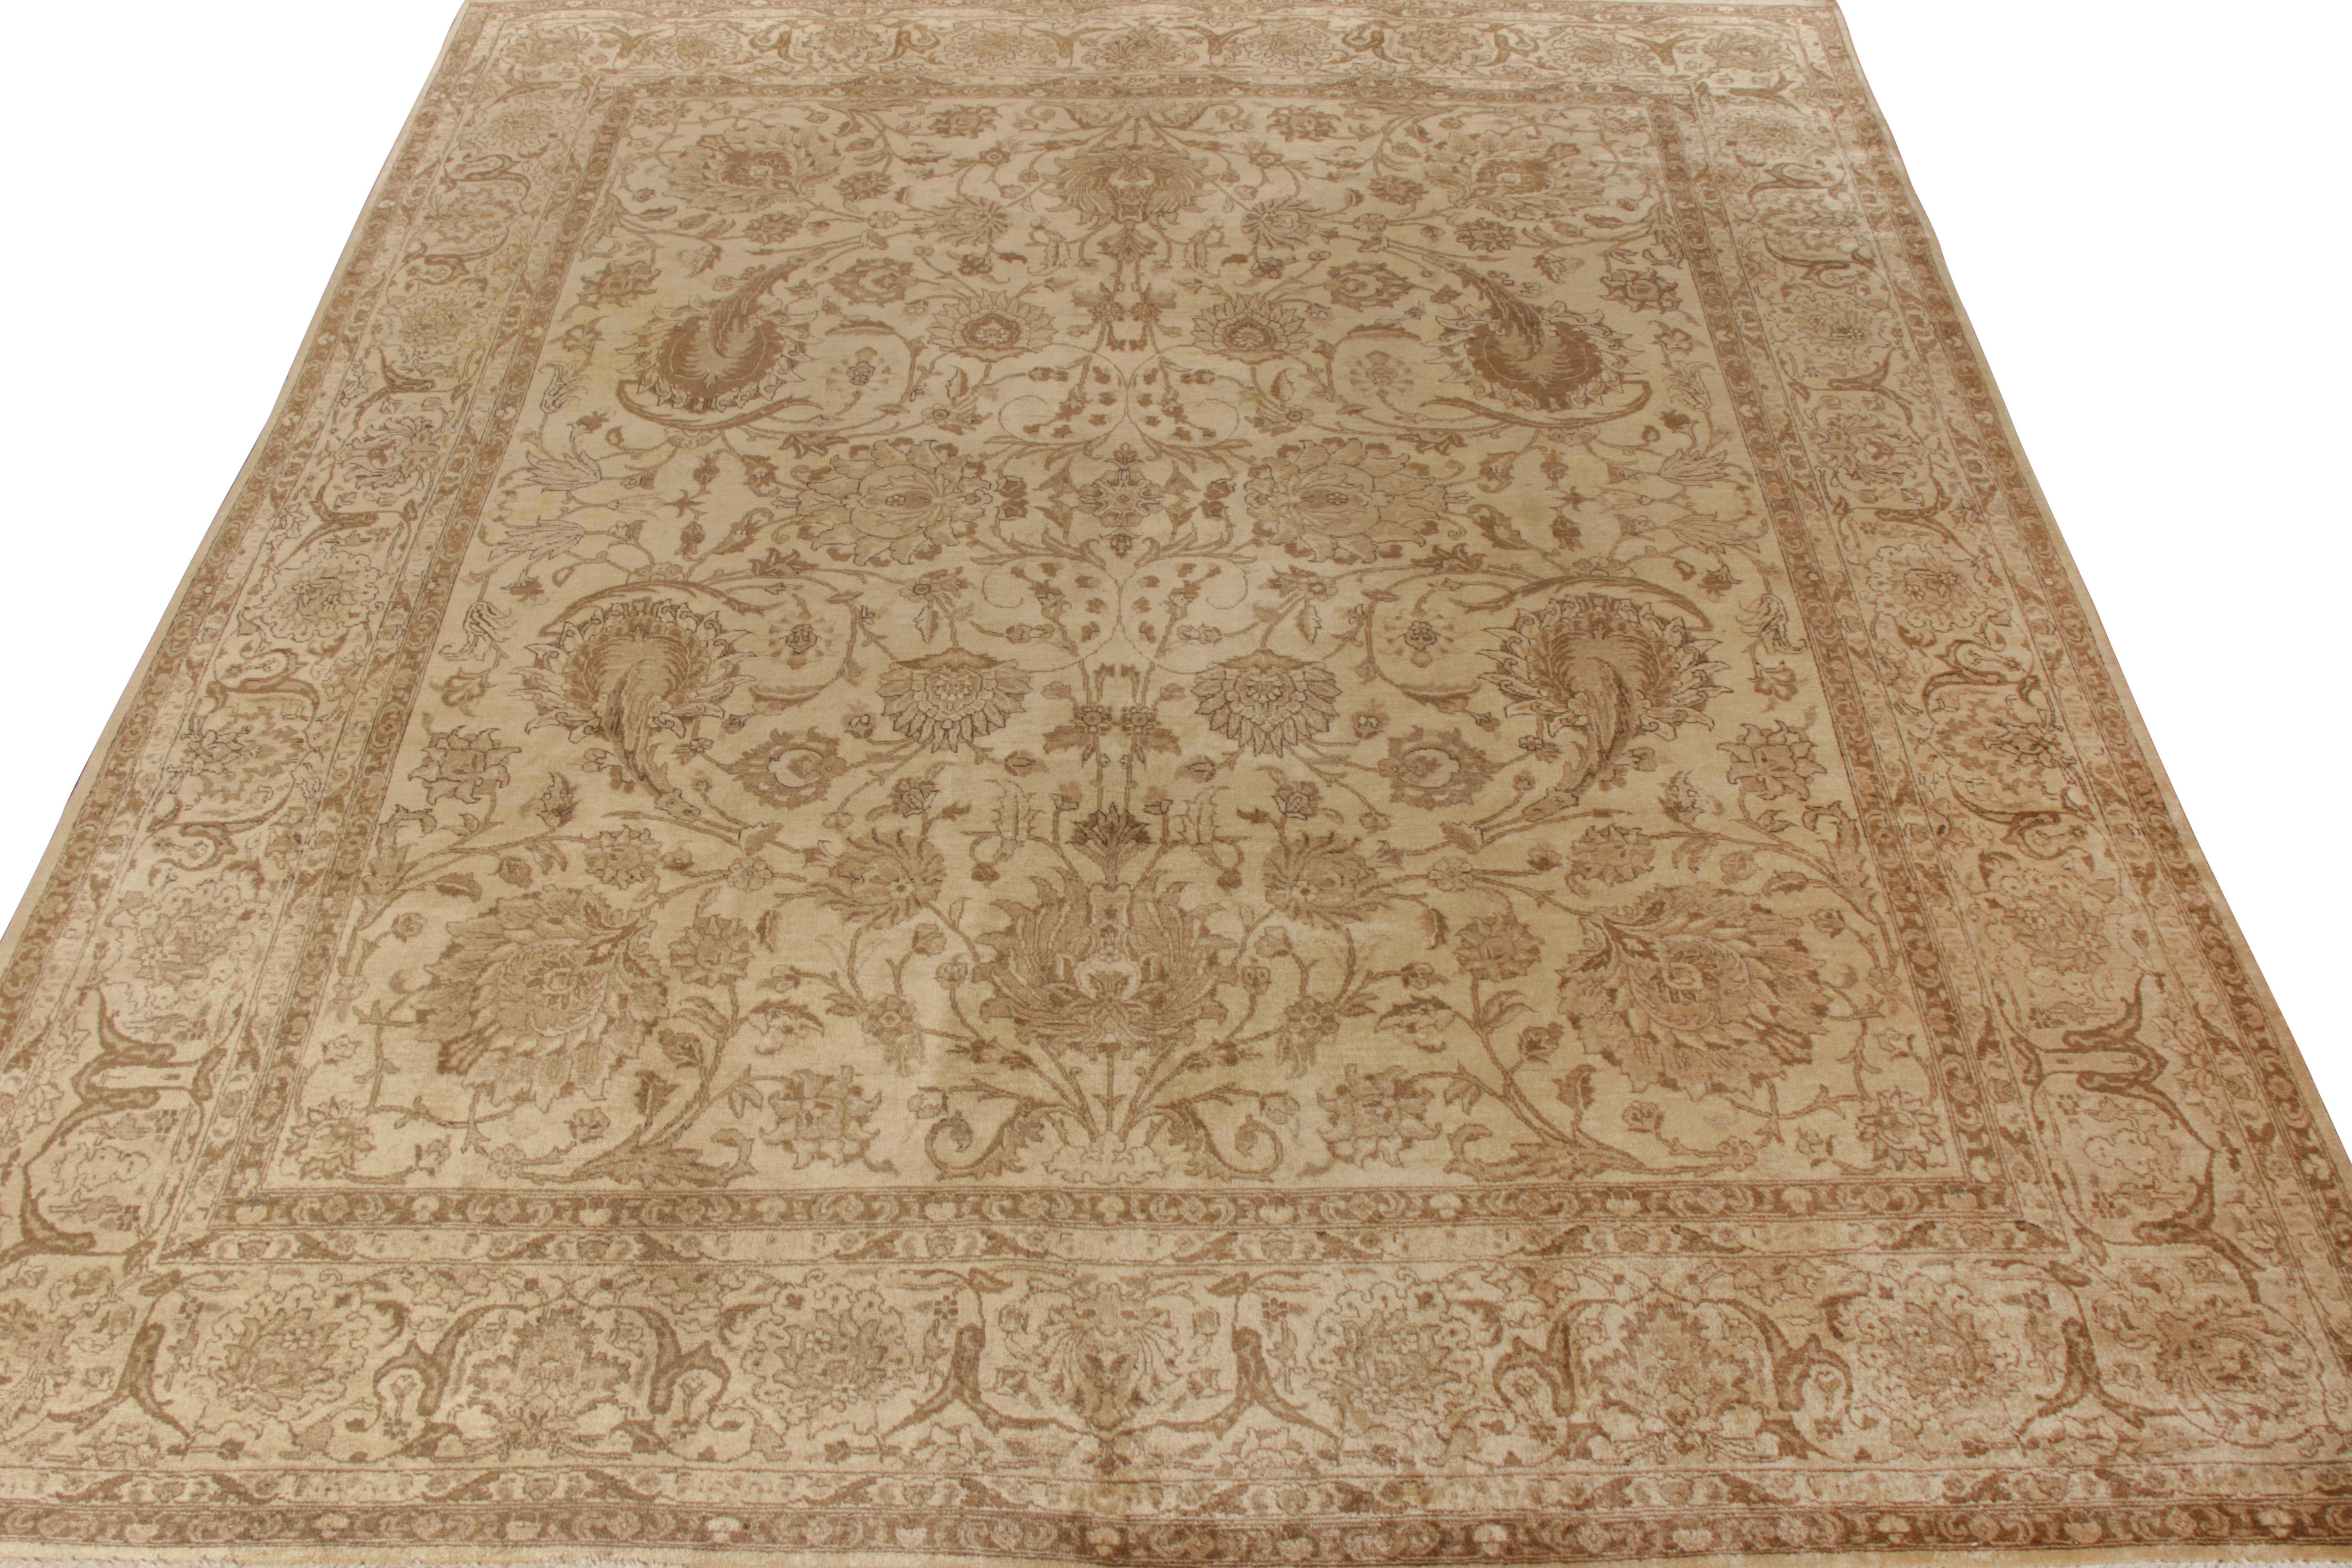 This 9x11 antique Tabriz rug originates from Persia circa 1920-1930. Hand knotted in the finest quality wool, this piece from Rug & Kilim’s Antique & Vintage collection is an exemplary drawing that witnesses a harmonious union of colors and scale.